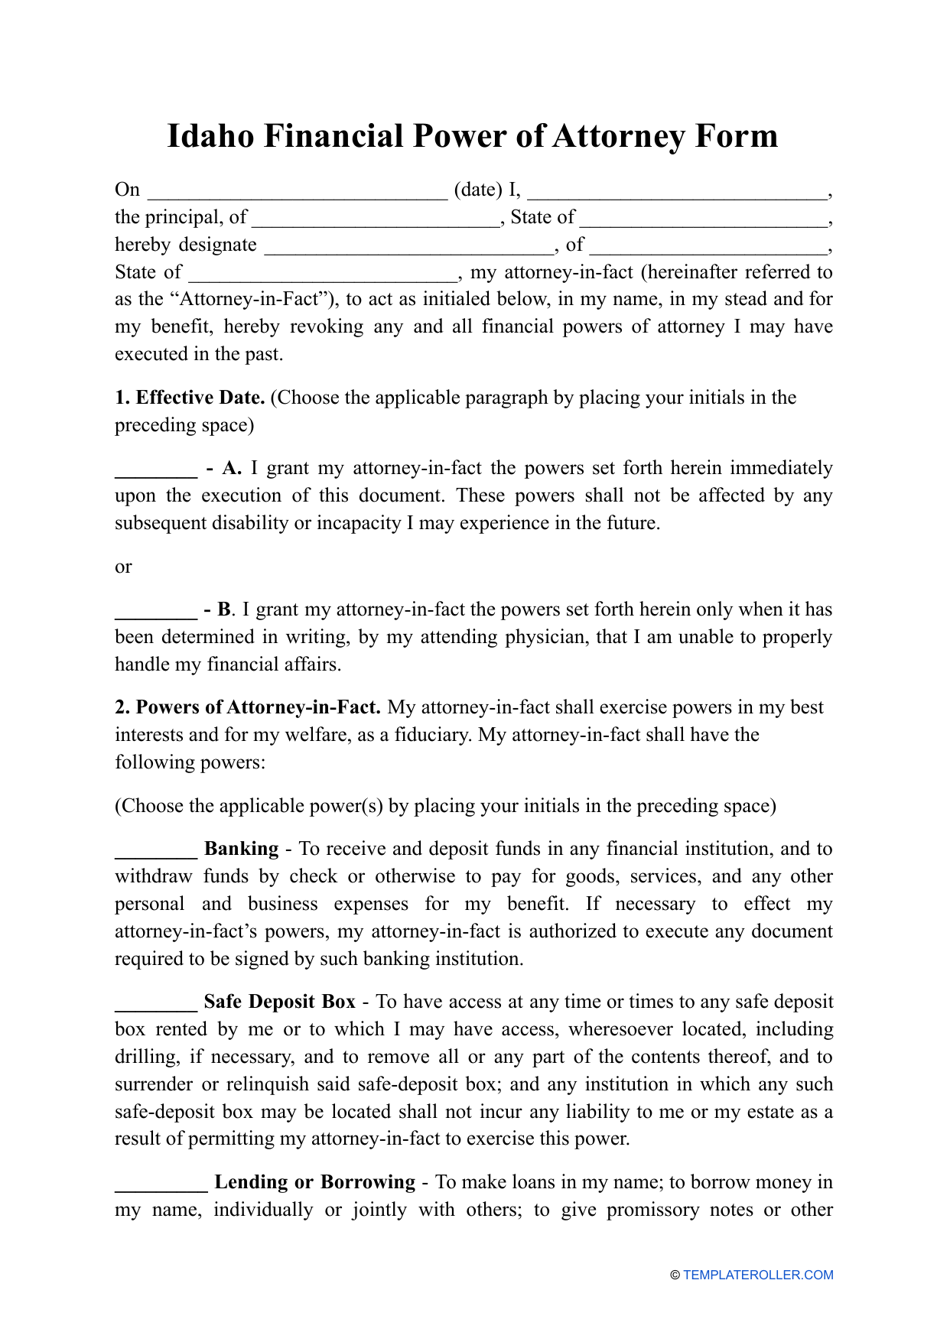 Financial Power of Attorney Form - Idaho, Page 1